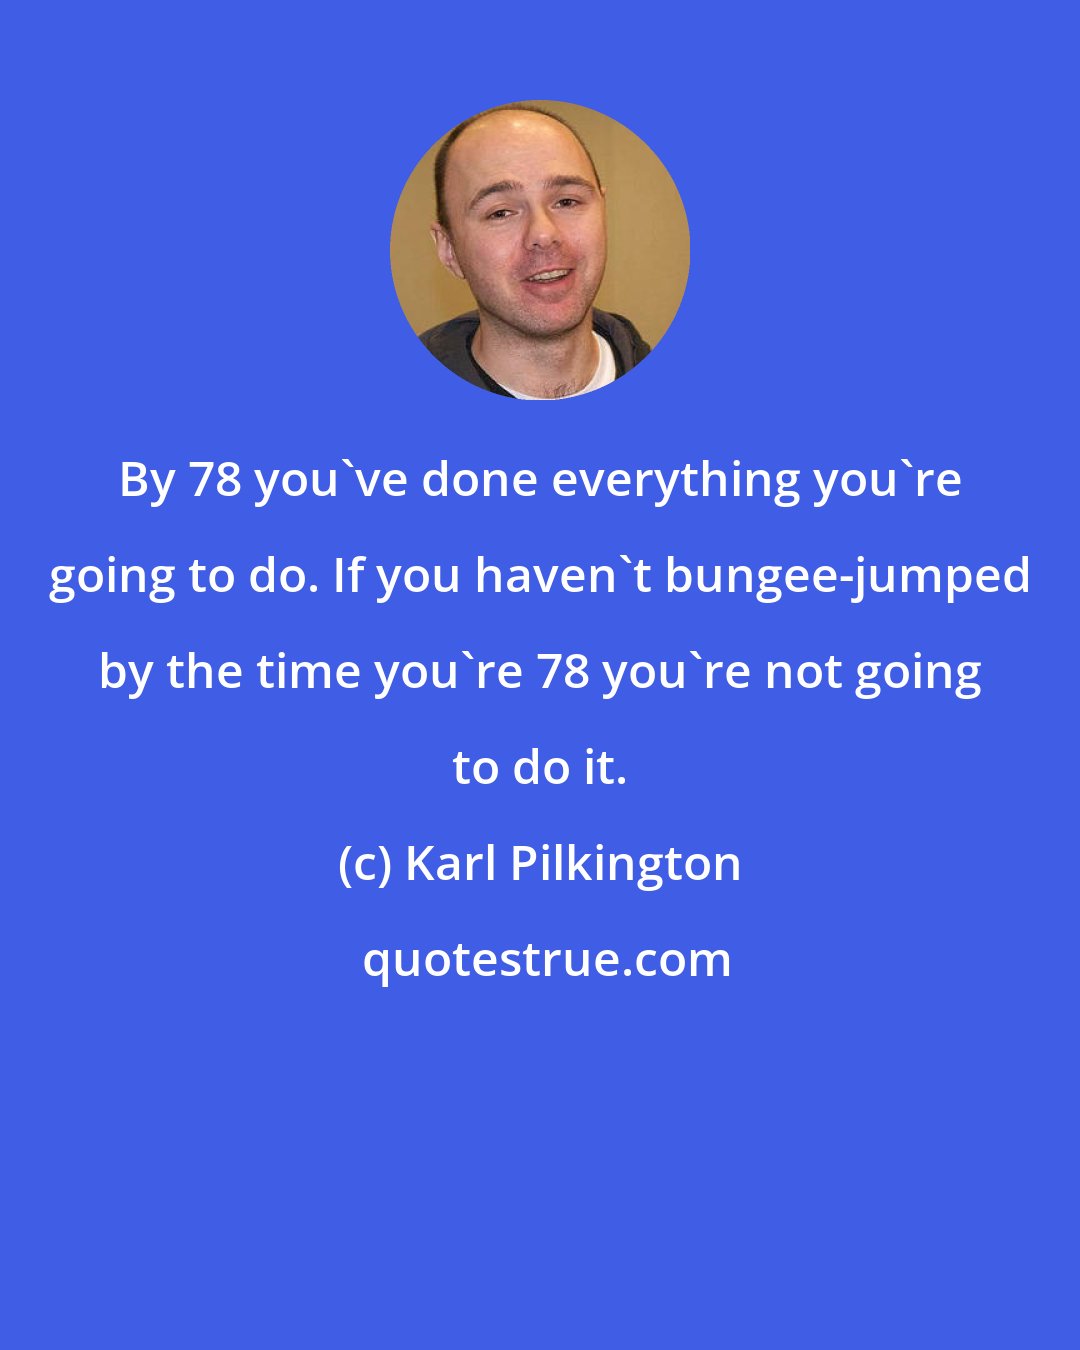 Karl Pilkington: By 78 you've done everything you're going to do. If you haven't bungee-jumped by the time you're 78 you're not going to do it.